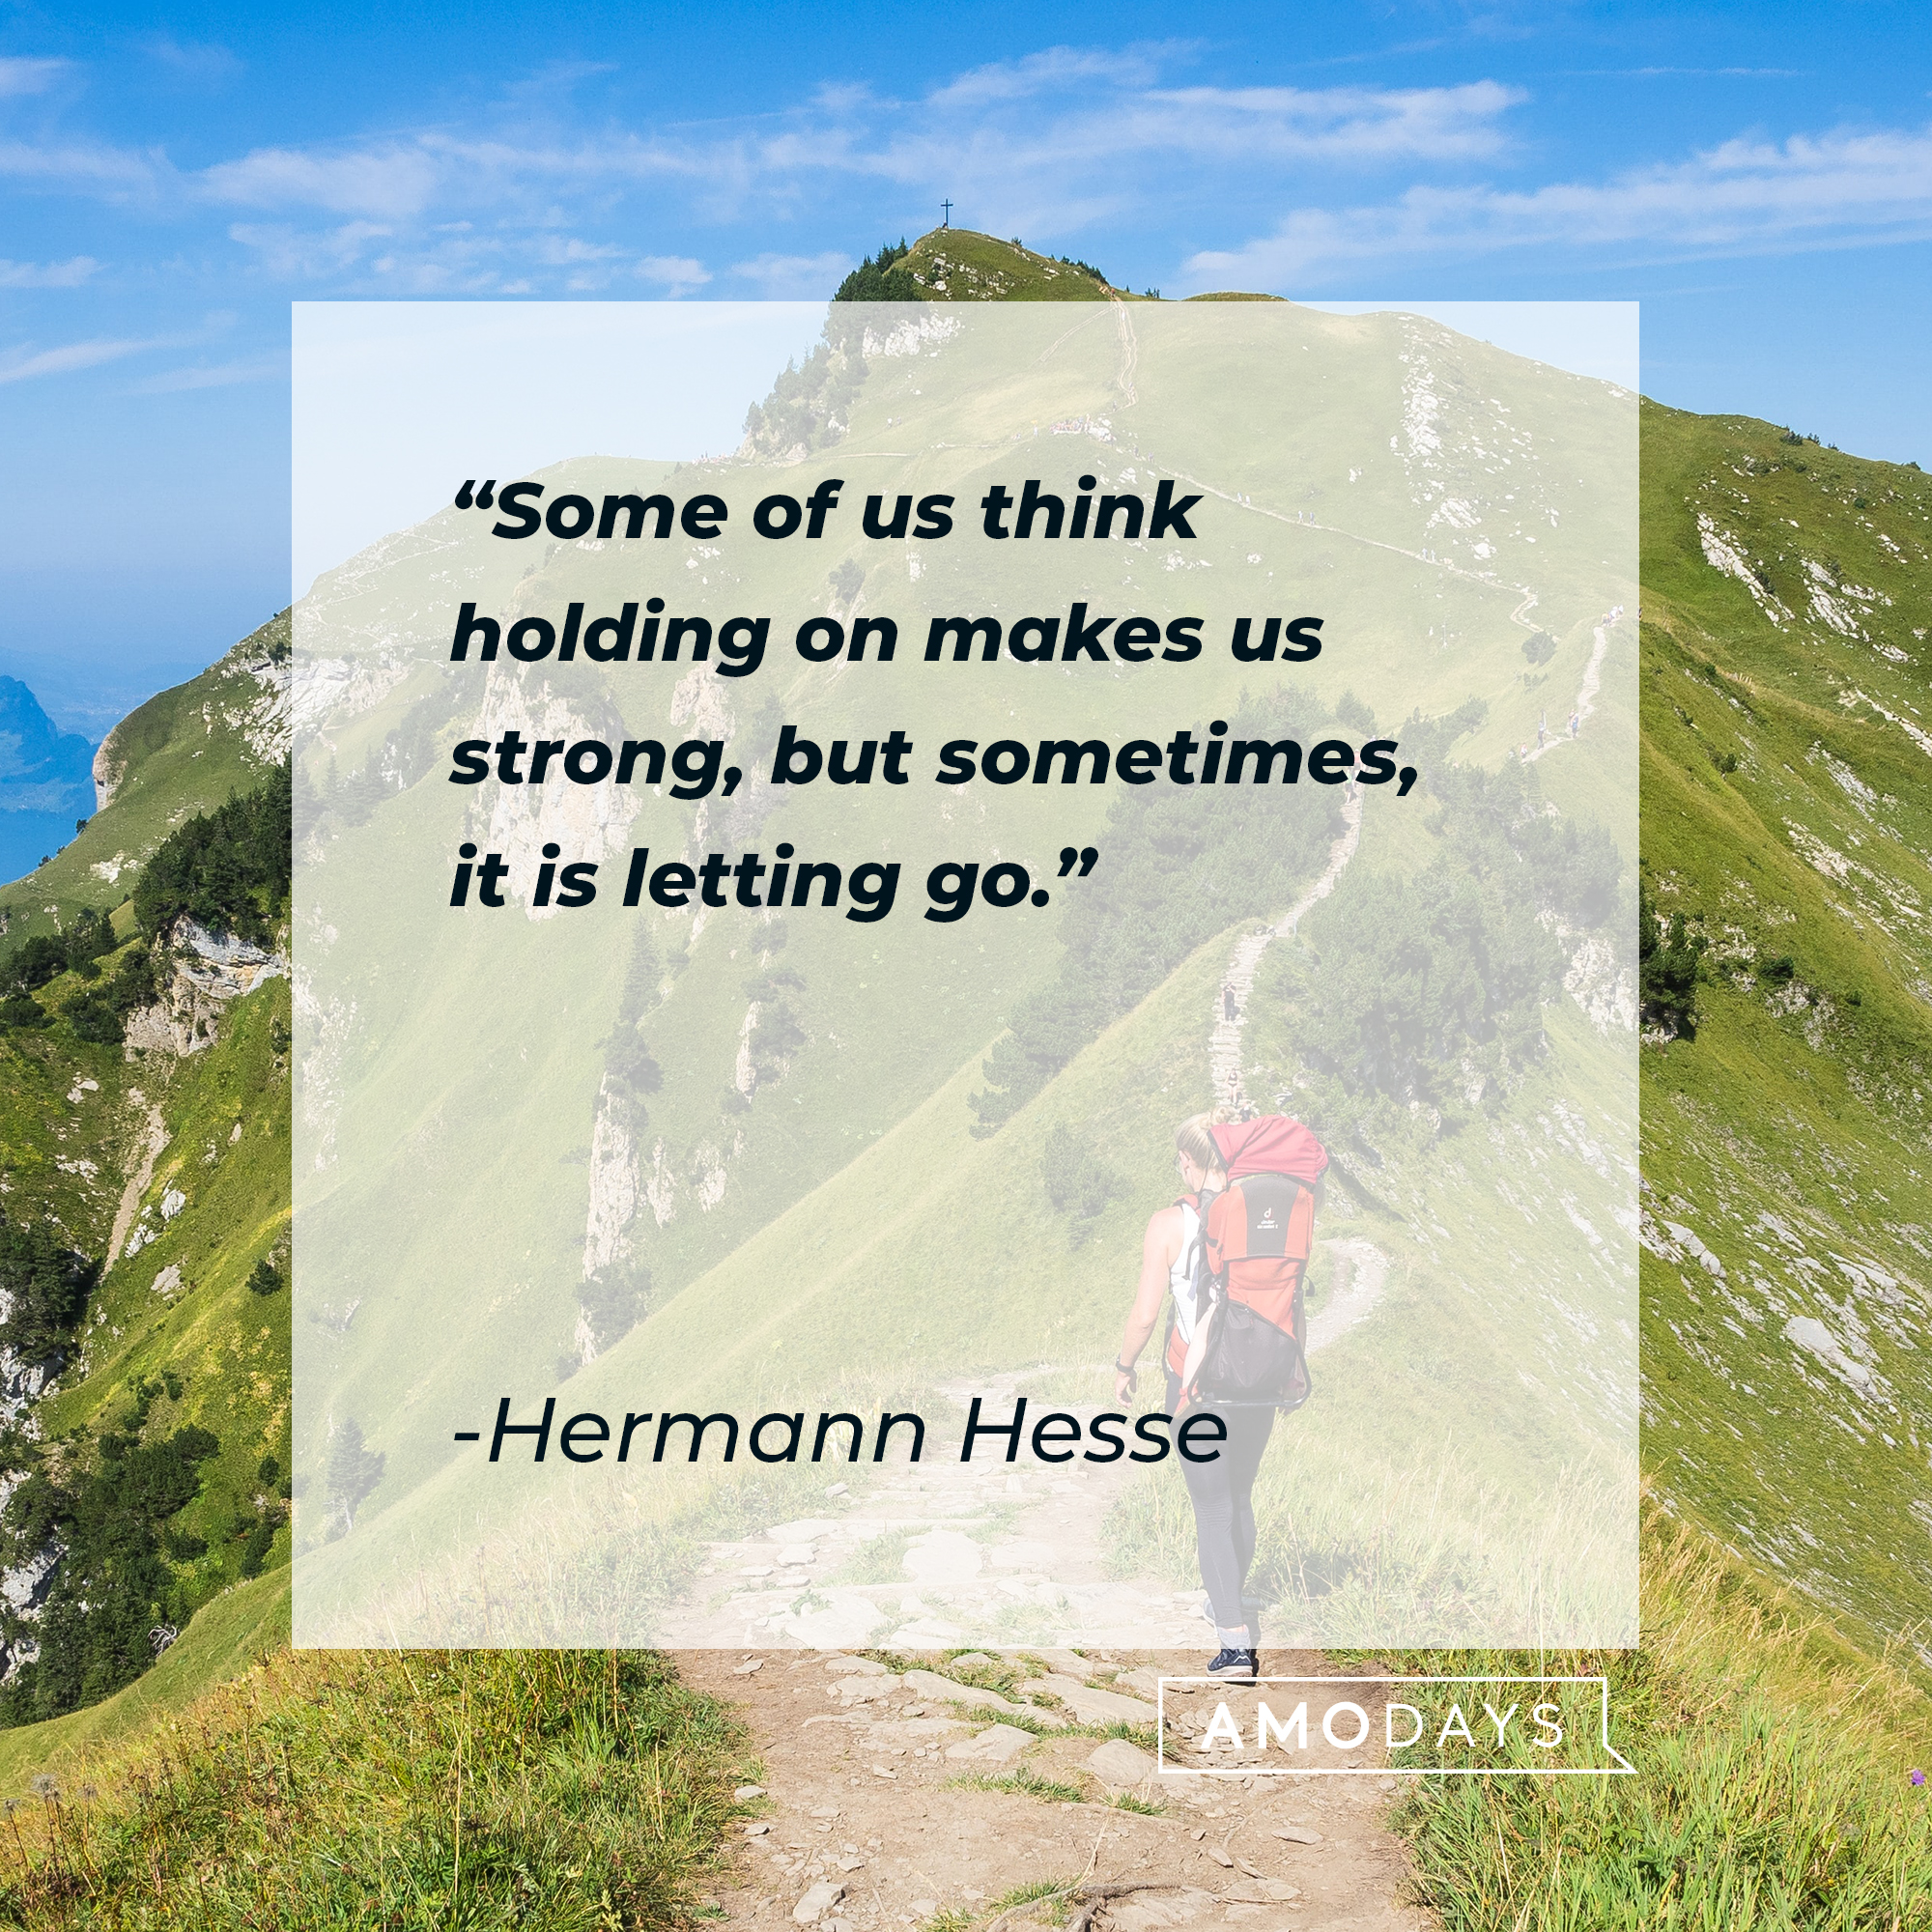 Hermann Hesse's quote: "Some of us think holding on makes us strong, but sometimes, it is letting go." | Image: Unsplash.com